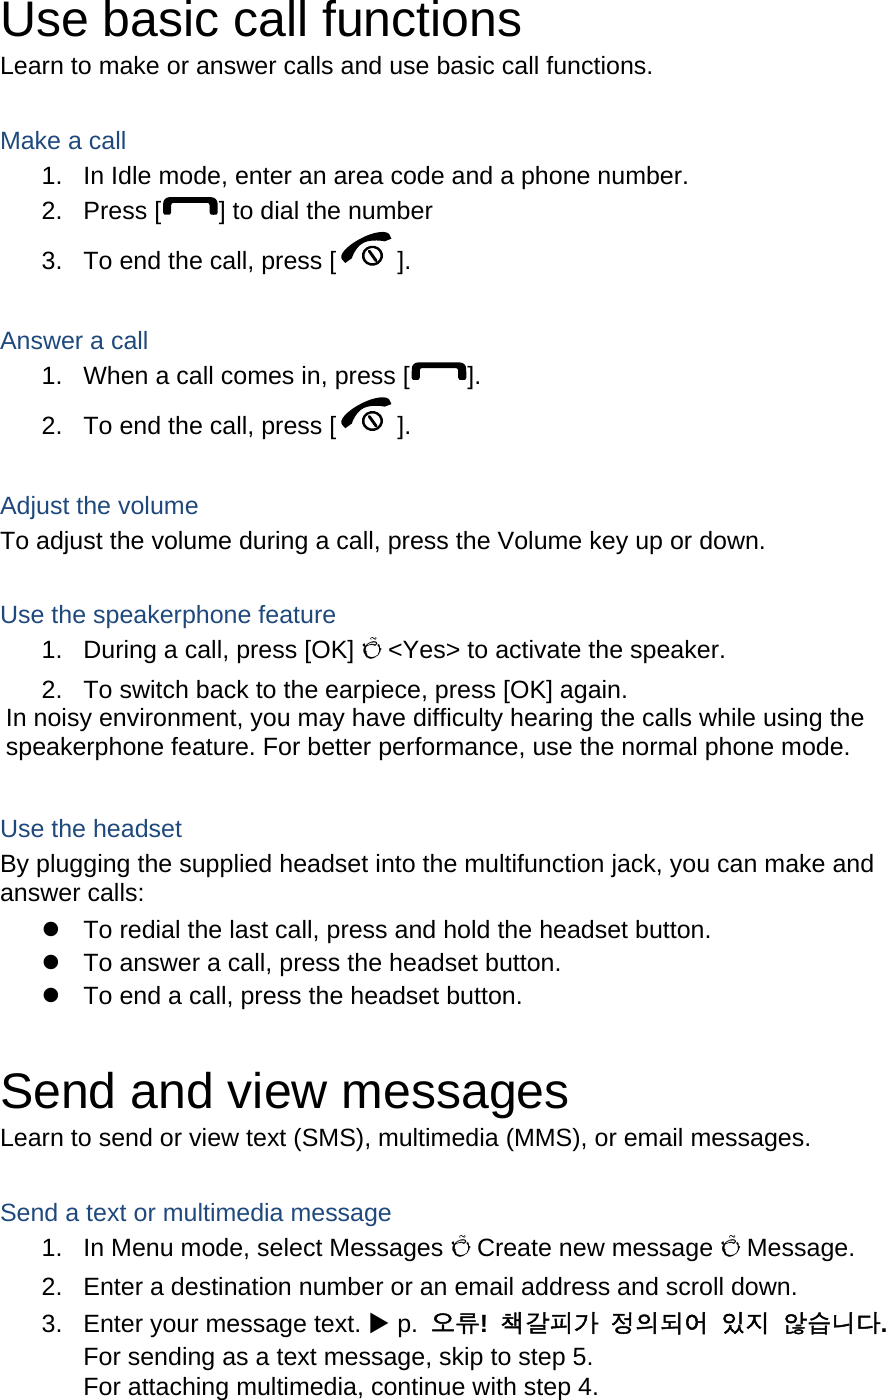 Use basic call functions Learn to make or answer calls and use basic call functions.  Make a call 1.  In Idle mode, enter an area code and a phone number. 2. Press [ ] to dial the number 3.  To end the call, press [ ].   Answer a call 1.  When a call comes in, press [ ]. 2.  To end the call, press [ ].  Adjust the volume To adjust the volume during a call, press the Volume key up or down.  Use the speakerphone feature 1.  During a call, press [OK] Õ &lt;Yes&gt; to activate the speaker. 2.  To switch back to the earpiece, press [OK] again. In noisy environment, you may have difficulty hearing the calls while using the speakerphone feature. For better performance, use the normal phone mode.  Use the headset By plugging the supplied headset into the multifunction jack, you can make and answer calls: z  To redial the last call, press and hold the headset button. z  To answer a call, press the headset button. z  To end a call, press the headset button.  Send and view messages Learn to send or view text (SMS), multimedia (MMS), or email messages.  Send a text or multimedia message 1.  In Menu mode, select Messages Õ Create new message Õ Message. 2.  Enter a destination number or an email address and scroll down. 3.  Enter your message text. X p.  오류!  책갈피가 정의되어 있지 않습니다. For sending as a text message, skip to step 5. For attaching multimedia, continue with step 4. 